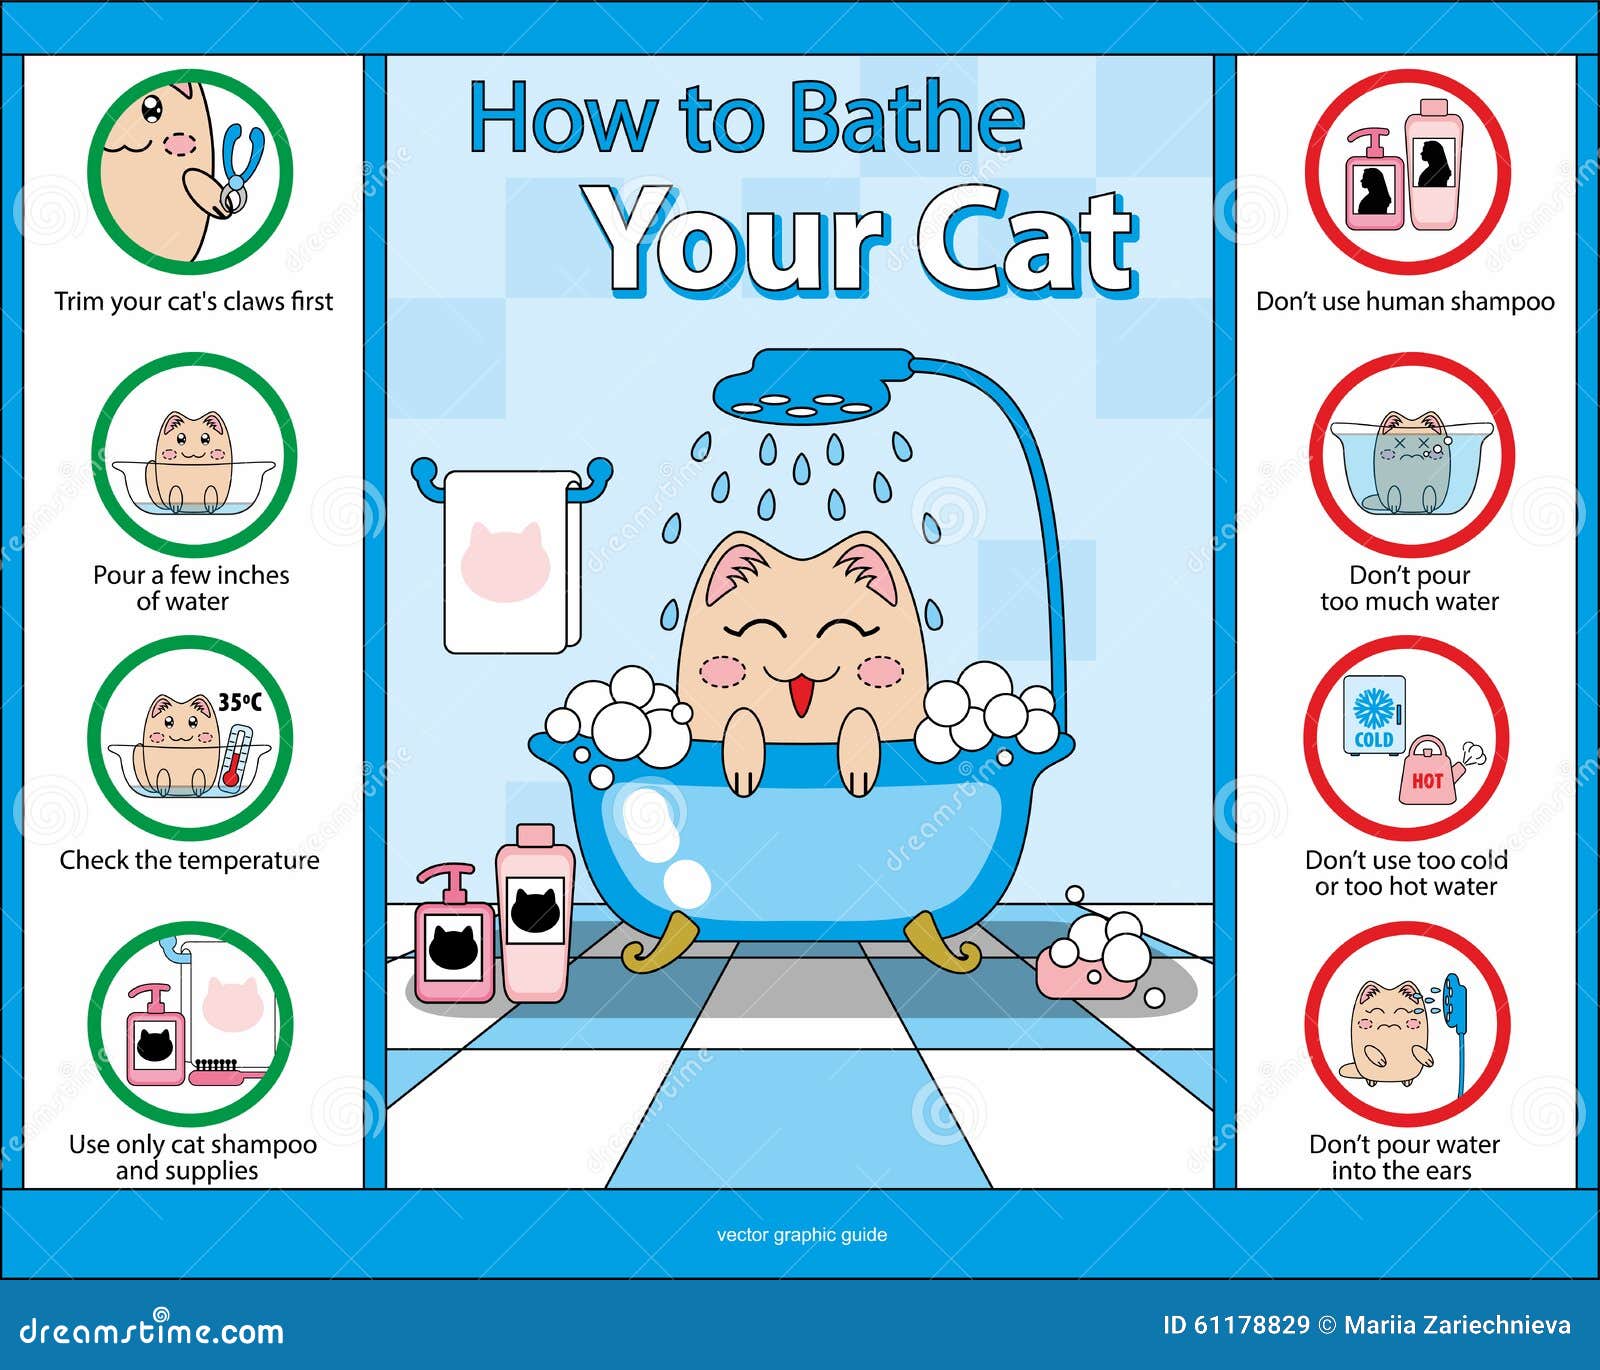 how to bathe a cat how to give a cat a bath do cats need baths how to wash a cat cat bath how to bathe a kitten should i bathe my cat should you bathe cats can you bathe a cat how to shower a cat cat wash should you bathe your cat do you bathe cats are you supposed to bathe cats how to wash a kitten how to give your cat a bath do you need to bathe cats can you give a cat a bath how to clean a cat can i bathe my cat cat shampoo giving a cat a bath should you wash your cat should you give your cat a bath how many kittens can a cat have pet cat best way to bathe a cat how to wash your cat how to pet a cat does my cat love me cat shower cat love how to train your cat what can i wash my cat with how to take care of a cat kitten play should cats be bathed how to get a cat to like you should i give my cat a bath where do cats like to be pet how to train a kitten how to take care of a kitten what to do when your cat is in heat how to make a cat like you how to wash a cat without cat shampoo how do you bathe a cat can you train a cat kitten care what do cats like cat tips kitten shampoo how to make your cat love you cat kitten when do kittens calm down how to get a cat to come to you how to bathe your cat should i get a cat bathing a kitten how to help a cat in heat best cat shampoo should i wash my cat kitten cat how to clean your cat cats and kittens cat behavior after bath how to give my cat a bath do cats like baths how to bathe a cat with claws when can kittens go outside is my cat happy do you have to bathe cats how to make my cat love me can you wash cats how to look after a kitten how to care for a kitten long haired kittens how to give a kitten a bath can you use human shampoo on cats do i need to bathe my cat how to get a cat how do you give a cat a bath can you bathe a kitten how to calm a cat how to play with cats how to make your cat happy kitten training how to care for a cat how long does it take a cat to have kittens how to dry cat after bath how many kittens do cats have how to calm down a cat getting a kitten can i wash my cat things to know before getting a cat do you give cats baths how to wash a cat without water how long is a cat a kitten cat soap sleepy kitten what to do when cat is in heat new kitten happy kitten should i bathe my kitten can i give my cat a bath how to get your cat to like you how to bathe a cat without getting scratched best way to give a cat a bath getting a cat when is a kitten a cat happy cat kitten how to dry a cat how to tell if your cat is happy how to wash my cat how to play with your cat play cat what to know before getting a cat what can i use to wash my cat what do kittens need my kitten what do cats need how to calm a kitten down how to tell if your cat is in pain how do you wash a cat looking after a kitten how to bathe my cat kitten in heat how to get a kitten to like you kitten behavior cat in pain where to get a kitten do you wash cats where can i get a kitten can i bathe my kitten when can i bathe my kitten how to hold a kitten what do you need for a kitten how to clean my cat how to look after a cat cat cleaning when can you bathe a kitten is it okay to bathe a cat how to move with a cat your cat should you wash a cat how do i know if my cat is happy why do cats move their kittens how to train your kitten how to make a kitten love you taking care of a cat what do you need for a cat bathing your cat new kitten tips kitten tips are you kitten me cat shivering after bath how to give a cat a bath without water how to train my cat how to shower a kitten clean cat are you supposed to give cats baths do you need to wash cats how to get your cat to come home how to dry a kitten after a bath can you give a kitten a bath when do cats have kittens what can i bathe my cat with how to clean a kitten taking care of a kitten how to calm a cat for a bath how to calm a kitten down at night kittens needing homes how to give a cat a bath with claws how do i bathe my cat kitten face pets at home kittens cat taking a bath how to play with kittens are you supposed to wash cats cat needs wet kitten can i wash my cat with just water how to get my cat to like me best way to wash a cat cat bathing tips can cats take a bath how to take a bath a cat pet kitten how long is a kitten a kitten kitten claws what to do when my cat is in heat can kittens get pregnant kitten temperature things cats love things cats like how to train a cat to behave things you need for a kitten what to wash cats with kitten cold how to help your cat in heat when to bathe a kitten how to clean a cat without water how many kittens can cats have what to use to bathe a cat how can i help my cat in heat how to clean cat fur without water how many times should a cat take a bath how to get a cat used to a new home what can i use to bathe my cat how to calm your cat down pregnant kitten can i shower my cat best kitten shampoo how to pet a kitten how to get a kitten how to know if your cat is in pain cat care tips should i get a kitten for my cat can you shower cats kitten love when to bathe a cat what soap can i use to wash my cat dry bath for cats should i get a kitten how to take a cat a bath do indoor cats need baths how long should i play with my kitten should you give a cat a bath how do you clean a cat kitten shivering cat having kittens the first time can i give my kitten a bath giving kittens a bath when can kittens get pregnant when can cats have kittens what to bathe a cat with caring for a cat how to clean a cat with wipes do i need to wash my cat cat having kittens having kittens do i have to bathe my cat do kittens need water easiest way to bathe a cat can cats be bathed when can my kitten go outside can i bathe a kitten when can kittens take a bath how many times should i bathe my cat how to move a cat to a new home how to make your kitten love you human shampoo on cats should i shower my cat do you need to wash your cat kitten first night new home cat bathtub does my kitten love me kitten care guide when can you give a kitten a bath what do kittens like can you wash your cat how to calm a kitten do kittens get cold good night kitten how do i give my cat a bath do you have to bathe your cat things to know about kittens where to find kittens kitten wipes how to make kittens like you kittens up kitten fur kitten tricks kitten training tips for beginners where do kittens like to be pet should cats get baths how many times to bathe a cat getting a new kitten washing a kitten do cats like warm or cold water for baths how to make a kitten like you what can you wash a cat with find a kitten kitten care tips do cats take a bath can you wash a kitten what you need for a kitten cat bath shampoo i want a kitten do cats love their kittens how to calm your cat should you bathe kittens can i bathe my cat at night kitten guide how long for a cat to have kittens what do i need for a new kitten are you supposed to wash your cat what to do if your cat gets out how can i bathe my cat have kittens when do kittens calm down at night do i need to give my cat a bath everything you need for a kitten playful kittens kitten shivering after bath when do kittens start to calm down when do kittens start playing washing your cat pets for homes kittens things to know before getting a kitten can you bathe your cat bathing my cat why is my kitten shivering how to shower your cat kitten scratched me how many times should i shower my cat what can i use instead of cat shampoo what to do when you get a kitten kittens first night do you shower cats how to bath cat at home how to keep a cat from going outside how to properly bathe a cat kitten body temperature what to bathe a kitten with when can you hold kittens can you give your cat a bath is it good to bathe your cat when can i give my kitten a bath dog and kitten what do kittens like to play with do you have to wash cats what to get for a new kitten train your cat how do i wash my cat can i wash my cat with shampoo giving your cat a bath how to get my cat to like my new kitten how to get rid of kittens kittens wanted when should i bathe my cat how to wash a cat for the first time what to do with kittens are you supposed to bathe your cat what shampoo is good for cats go cat kitten how to get a kitten to come to you how can i wash my cat getting a kitten when you have a cat i love kittens can kittens take a bath do you have to give cats baths how to take care of your cat what to do with a new kitten bathing cats at home cat after bath how to clean cat without bath kitten scratch what to know about kittens kitten needs can u bathe a cat can i wash my kitten love kitten bathing a cat at home do kittens need baths what can you use to wash a cat what is kitten play kitten home lovely kitten how to bathe a kitten without getting scratched can i use my shampoo on my cat i washed my cat with human shampoo how to shampoo a cat how to stop cat from moving kittens is my kitten in heat cats and baths how to find kittens outside can i shower my cat with human shampoo what to know before getting a kitten kitten pet play should i give my kitten a bath cat bath soap how to safely bathe a cat kitten bath soap what do you need for a new kitten what to wash your cat with how to keep your cat healthy looking for a kitten what to do with a kitten at night how to find a kitten how many times should i wash my cat cat bath temperature what can you bathe a cat with what you need for a cat what do indoor cats need why does my kitten stink do you need to bathe your cat cat bath time how to keep a kitten warm how do i clean my cat do you have to wash your cat can cats shower do you need to give cats a bath how to wash your cat at home when do kittens stop playing how to train my kitten new kitten care kitten shower should you shower your cat love for kittens good cat shampoo when should you bathe a cat is my kitten happy how to bathe your kitten what should i wash my cat with cat safe shampoo how to dry your cat after bath can kittens find their way home how to stop cat from going outside how to calm a stressed cat after moving how to bathe a cat at home when should i bathe my kitten how to take care of cats and kittens what to wash kittens with do cats bath things cats need how to stop cat from running outside what to do if you find a kitten how to clean a dirty cat do kittens feel cold cant find my cat how to wash cat at home how to make a kitten come to you how to bathe a cat without water how do you train a kitten what to do when you first get a kitten how long to play with kitten how to dry my cat after a bath can i wash my cat with dog shampoo how to calm my kitten down what can i wash my kitten with kitten dog how to know if your kitten loves you can cats get baths how to stop my cat from going outside how to bathe my kitten how to wash your kitten do cats get baths can you wash a cat with dog shampoo how to tell if a kitten is long haired why does my cat bathe me can we give bath to cats how many times should cat take a bath how to shower my cat when can kittens go to a new home how to keep your cat happy how do i know if my kitten is in heat how do you take care of a cat what to do with kittens at night cat's body temperature smelly kitten what to get for a kitten how to clean cats fur do cats need to be washed can we use human shampoo for cats can we bath cats can you feel kittens in a pregnant cat should i get a kitten for my dog when is a kitten an adult first night with a new kitten can cats have a bath what can you do for a cat in heat when can you get rid of kittens how to calm my cat how to get a cat to calm down cat keeps moving kittens can you wash cats with human shampoo is it necessary to bathe a cat how do i know if my kitten is happy things for kittens how to get a cat to like water healthy kitten when can i shower my kitten how many times should you bathe your cat how to give a cat a shower what can you wash your cat with how to comfort a kitten do cats bathe when do kittens go in heat when can a kitten take a bath how to know how many kittens your cat is having kitten feels warm ways to play with your cat can you feel kittens move in a pregnant cat when do kittens have their first heat how long does a cat take to have kittens how to care for a new kitten can i give a kitten a bath how to get a kitten to calm down kitten products how to know if a kitten likes you best way to clean a cat how to tell if a kitten is pregnant how do kittens play how to get your cat to take a bath how to stop kitten from scratching how to keep my cat from going outside cat holding kitten cat keeps running outside i want to get rid of my cat does my cat need a bath can cats be washed how long can a kitten go without water how do you bathe a kitten easiest way to give a cat a bath how can i clean my cat how to make a kitten feel safe like a kitten cat care guide things to know when getting a kitten how to get a cat to like a kitten is it okay to give a cat a bath how to make my kitten like me are you supposed to give your cat a bath do cats shower first night with kitten best kitten how to play with your kitten how long does it take for cat to have kittens everything you need to know about cats kittens first night home how to calm down my cat how to help a kitten with a cold when should i give my cat a bath how do i wash my cat without getting scratched how many kittens how to shower kitten getting a kitten when you have a dog can you bathe cats with human shampoo what to know when getting a kitten how to get your kitten to like you can kittens get colds how to dry a cat after bath wash my cat what to use to wash a cat how to wash a kitten without cat shampoo how to make your cat like water when do kittens mellow out kittens got claws everything to know about kittens is it okay to bathe a kitten what can you use to bathe a cat kitten soap how to clean cats face how long should you play with your kitten kittens looking for homes can you shower kittens how do i calm my cat down what to wash my cat with easy way to bathe a cat can a kitten take a bath can i shower my kitten kitten s how to calm your kitten down should cats have baths when can a cat get pregnant after having kittens how do i know if my kitten likes me can u wash a cat what do you need to take care of a cat kitten head how to keep cat out of bathtub how do i know my kitten loves me is my kitten pregnant things kittens need why does my kitten how many times should you wash your cat how long after having kittens can a cat get pregnant can we bathe a cat giving my cat a bath do cats like kittens cat got out what to do the kitten at play should cats take baths when can you feel kittens move in pregnant cat how long is a kitten in heat best way to bathe a kitten do you wash your cat can you train a kitten how to take a kittens temperature how to wash a cat without getting scratched should i wash my kitten how many times cat take a bath do cats need showers how can i calm my cat down do you bathe kittens how many times should a kitten take a bath how to give a kitten a bath with shampoo should we bathe cats good kitten how to make a kitten comfortable can you bathe a pregnant cat kitten stinks kitten first heat can kittens go outside when do kittens start cleaning themselves what can i do to help my cat in heat cat's home what to do when you find a kitten my kitten stinks do i need to shower my cat does cat take a bath when can you feel kittens move what do kittens look like how can i give my cat a bath how to keep cats from running outside get rid of kittens can u give a cat a bath kitten time out how do i train my cat how to warm up a cat after a bath when do kittens need water how to give bath to kitten can we bathe cats what should i bathe my cat with do i have to wash my cat safe kitten what to get for a cat how do you know if your kitten loves you how to help a kitten in heat what to do when your cat gets out do kittens calm down how to dry a kitten when do cats stop having kittens are you supposed to shower cats is it good to bathe cats can kittens cat behavior after having kittens what can i wash my kitten with at home how to dry a wet cat i love my kitten how can you tell if a cat's pregnant how to tell if your kitten is pregnant how to tell if kitten is pregnant how can i find my cat where can i find a kitten how to dry off a cat how to get a cat to take a bath what can you give a kitten for pain how do i get a cat how do i find my cat when can i start bathing my kitten kitten running things to get for a kitten how to get my cat to calm down can you give kittens water can i bathe my pregnant cat are cats supposed to be bathed how to tell if a kitten likes you how to bathe a long haired cat basic cat care how to take a kitten a bath things to get for a new kitten how to keep my cat healthy water temperature for cat bath when to give kittens water how to make my kitten love me how to take care of a new kitten how to clean my cat without a bath when can i bathe a kitten how to get your cat to like baths how to bath the cat can i bathe my cat with human shampoo cat or kitten cat having a bath how many times should you bathe a cat does my kitten like me kitten wants to go outside how to get my kitten to like me cat care tips for beginners where can i get a kitten from how to make a kitten happy training your kitten how can i get a cat how to wash your cat for the first time how to tell if my kitten is pregnant how long does it take to have kittens can you bathe a cat with dog shampoo how to make kitten love you kitten first bath holding kitten kittens at night what to do when you get a cat how to get cat to like new kitten how to tell if your kitten loves you how to give my kitten a bath do kittens can you wash a cat with shampoo how to clean your cat without water cat having kittens what to do how to tell if your cat's pregnant where can i take my cat to get a bath how to get your cat to calm down is it safe to bathe a cat how to make a new kitten comfortable how do you give a kitten a bath what can i bathe my kitten with do cats need to take a bath when can kittens have water my kitten scratched me when should i wash my cat do i have to give my cat a bath how to make a new kitten feel at home fun things for cats what you need for a new kitten why does my kitten scratch me how do i know if my kitten is pregnant hot kitten how to get kittens to come to you kitten water are u supposed to bathe cats do you bathe your cat how to tell a kitten off how to wash my kitten cat body wash how to clean your cat without a bath do you have to give your cat a bath how do you know if your cat's pregnant how to get a kitten used to a dog what do you wash cats with how to know your kitten loves you how to clean a cat's face how to wash a cat's face how to bathe your cat for the first time when to start bathing kittens do u bathe cats everything you need to know about kittens healthy pet kitten should you give kittens a bath how to get a kitten used to a new home what can you bathe a kitten with is it okay to use human shampoo on cats how to bathe a cat without cat shampoo how many times should kitten take a bath for the love of kittens dirty kitten do you need to give your cat a bath how to get a pet cat how to tell if a cat's pregnant how to dry your cat kitten training tips how do you take care of a kitten how do i wash my cat without getting scratched giving my cat a bath how can i find my cat how do i find my cat how can i give my cat a bath what to do when you get a cat how to get your cat to take a bath does my cat need a bath how do you bathe a kitten do cats shower when should i give my cat a bath how to clean your cat without water wash my cat how to clean your cat without a bath should cats have baths how to wash a cat without getting scratched should i wash my kitten do cats need showers how to give bath to kitten what should i bathe my cat with do i have to wash my cat safe kitten how to get a cat to take a bath how to take a kitten a bath how to clean my cat without a bath when can i bathe a kitten how to give my kitten a bath how do you give a kitten a bath what can you use to bathe a cat what can i bathe my kitten with do cats need to take a bath when should i wash my cat do i have to give my cat a bath what to wash my cat with how to wash my kitten do you have to give your cat a bath should you give kittens a bath do you need to give your cat a bath should cats take baths do you wash your cat how to shower kitten do i need to shower my cat can you shower kittens can a kitten take a bath can i shower my kitten is it good to bathe cats what can i wash my kitten with at home do you bathe kittens how to bath the cat where can i take my cat to get a bath is it safe to bathe a cat do you bathe your cat can cats be washed what to use to wash a cat what can you bathe a kitten with does cat take a bath cat having a bath what do you wash cats with how to bathe a cat how to give a cat a bath cat bath should i bathe my cat do cats need baths cat tips how to bathe a kitten should you bathe your cat should i give my cat a bath how to give your cat a bath should you bathe cats can you give a cat a bath can i bathe my cat can you bathe a cat cat insurance my cat where is my cat giving a cat a bath should you wash your cat should you give your cat a bath pet cat how to wash your cat pet insurance for cats do i need to bathe my cat do you bathe cats should cats be bathed how to wash a cat do you need to bathe cats how do you bathe a cat do you give cats baths how to bathe your cat can i give my cat a bath should i wash my cat your cat how to give my cat a bath cat coat how to groom a cat do you have to bathe cats grooming cat cat health insurance how to give a kitten a bath how to get a cat what can i wash my cat with how do you give a cat a bath kitten bath how to calm a cat cat a cat kitten insurance can i wash my cat cat shower washing a cat how to shower a cat should i bathe my kitten how to bathe a cat without getting scratched how to wash a kitten should you give cats a bath how to clean your cat what can i use to wash my cat find my cat how to bathe my cat cat is cat cat off can i bathe my kitten when can i bathe my kitten why is my cat pet a cat bathing your cat how to pet your cat how to find your cat how to give a cat a bath without water how to wash a cat without water aspca cats can you bathe a kitten can you give a kitten a bath cat feline what can i bathe my cat with how do i bathe my cat cats can how to wash my cat cat needs how to find my cat how to calm your cat cat bathing tips dog cats what to use to bathe a cat cat cats what can i use to bathe my cat should you wash a cat cats scratching make a cat do you wash cats how to clean cats can you wash cats do i need to give my cat a bath can i give my kitten a bath get cat when can you bathe a kitten what to bathe a cat with do i need to wash my cat do i have to bathe my cat when to bathe kittens how to calm a cat for a bath can i bathe a kitten can you give your cat a bath things to do with your cat do you need to wash your cat when can you give a kitten a bath giving your cat a bath how to take a bath a cat how do i give my cat a bath giving a kitten a bath do you need to give cats a bath pet insurance for kittens cat taking a bath how to bathe a kitten without getting scratched help cat where can i get my cat groomed how do you wash a cat home is where your cat is do cats take baths when to bathe a cat how to groom your cat cat article bath cats & dogs home cat safe how to take a cat a bath calm cats do cats get baths how can i bathe my cat how to clean my cat washing your cat bathing my cat can you bathe your cat how to shower your cat home is where my cat is what to do when you get a kitten what is my cat when can i give my kitten a bath can you wash your cat how to shower a kitten when should i bathe my cat do you need to wash cats do you have to bathe your cat cats having kittens how to groom a cat at home how to get a cat used to a dog should cats get baths do you have to give cats baths how to clean cat without bath can i wash my kitten bathing a cat at home do kittens need baths cat grooming at home safe cat should i shower my cat how to get a dog used to a cat can cats have baths should i give my kitten a bath can cats take a bath how to safely bathe a cat what to wash your cat with how to clean kitten cleaning cat what can you bathe a cat with my cat my cat do you need to bathe your cat do you have to wash your cat how to wash your cat at home what to wash cats with cat grooming tips can you wash a kitten how to bathe your kitten if a cat cat have can i shower my cat when should i bathe my kitten how to bath cat at home aspca cat insurance should i get my cat a kitten should you bathe kittens can you shower cats what to bathe a kitten with my home cat is it good to bathe your cat how to bathe a cat without water what can i wash my kitten with how do i wash my cat how to keep a cat how much to groom a cat where can i take my cat what to do if your cat scratches you do cats need to be washed should i get a kitten for my dog how can i wash my cat how to calm my cat what to do if you find a cat bathing cats at home can cats be bathed how to give a cat a shower when can kittens take a bath what can you use to wash a cat cat get can i give a kitten a bath why does my cat groom my dog do you have to wash cats cats and baths can you give a cat washing kittens where to pet your cat can kittens take a bath if cat should you shower your cat what is cat grooming what should i wash my cat with how to bathe a cat at home how to wash cat at home what can i use to give my cat a bath can cats get baths how to bathe my kitten how to wash your kitten can i give a cat a bath what to do if you get scratched by a cat is this your cat grooming your cat how to shower my cat should i get my cat groomed do i bathe my cat how to give your kitten a bath when should you bathe a cat how to bathe cat without getting scratched it is my cat do you shower cats what to wash kittens with what to do when your cat scratches you what can you wash your cat with can you cat calm my cat how to bathe your cat without getting scratched what can you wash cats with when should you give your cat a bath how to wash your cat without getting scratched how to give my cat a bath without getting scratched make your own cat pet and cat pet your cat are cats good for your health how to groom my cat where can i get my cat bathed keeping a cat pet for articles where can i take my cat to get groomed when can i shower my kitten is bath cat good when can a kitten take a bath cats need baths what to do when you find a cat should i get a cat for my dog how much is it to groom a cat should you groom your cat when can i give a kitten a bath how do i clean my cat is water good for cats can cats shower can i bathe kittens should you bathe your kitten how do i give a cat a bath how to wash my cat at home what to do with your cat clean cats my own cat when should i give my kitten a bath cat getting a bath what can i use to bathe my kitten do cats bath pet plan insurance for cats is it good to give cats baths can you take a cat a bath is it safe to bathe a kitten what to use to bathe a kitten do cats need to bathe pet insurance plans for cats where is your cat insure my cat are baths good for cats tips for giving a cat a bath what should i use to bathe my cat can i get my cat groomed when can i wash my kitten do cats need insurance when can i give kittens a bath do i need to bathe my kitten how to give cats a bath without getting scratched do you have to give cats a bath how can i clean my cat without a bath do cats bathe how do i bathe a cat how to make a cat calm when to give a cat a bath my cat needs a bath how to bathe a kitten at home how do you give your cat a bath what can i use to wash my kitten cat in insurance how to get pet insurance for cat when to give a kitten a bath how to take your cat a bath how can i bathe my cat without getting scratched when can i bathe kittens how to safely give a cat a bath do you have to give a cat a bath clean cat without bath tips to bathe a cat how to get my cat to take a bath how should i bathe my cat what can i wash my cat with at home what do i wash my cat with do cats need to shower do cats take showers pet plans for cats what is cat insurance cat taking a shower when should you wash your cat what to use to give a cat a bath when can i give bath to my kitten how to get cat insurance when to bathe cat is it good to give your cat a bath cat is good what does pet insurance cover for cats should kittens be bathed how do i bathe my kitten when to wash your cat how to give your cat a bath without getting scratched how do you wash your cat how to bathe my cat without getting scratched should you shower cats how can you bathe a cat when can you wash a kitten what do you bathe a cat with what can you wash a kitten with when can cats take a bath do i have to shower my cat cat health plan which cat insurance do i need cat insurance when can you shower a kitten when to give your cat a bath where can i get my cat washed should you give a kitten a bath is it good to wash your cat do you give kittens baths can you shower your cat how can i shower my cat giving a cat a bath tips how to wash your cat without water can i take my cat a bath when should you bathe your cat when should you bathe a kitten bath cats home should you wash your kitten when to bathe your cat can i wash a kitten how do i bathe my cat without getting scratched when to give cat a bath when should you give a cat a bath what can you use to give a cat a bath when to give kitten a bath how can you give a cat a bath when to give bath to kittens what can you use to wash your cat can i give my cat a shower how much should i bathe my cat do kittens need to be bathed what to use to wash your cat giving bath to cat how do you bathe cats is it good to give a cat a bath what do you use to bathe a cat what do i bathe my cat with are cats safe cat insurance pet should cat be bathed how bath a cat what can i bathe a kitten with does cat need to bath how to clean kitten without bath should you wash kittens do you need to shower cats what can i wash a kitten with what to bathe your cat with can kittens have baths can cats get a bath when do cats need baths when can a cat take a bath can i wash a cat can i take my kitten a bath how to give kitten bath do you need to shower your cat how to take a cat a bath without getting scratched do you have to shower cats how to get a cat to bathe where can i take my cat for a bath i bathed my cat how to take my cat a bath what is a cat bath do i give my cat a bath bath cats and dogs home kittens how do i shower my cat do cats have to be bathed is it safe to bathe cats how to make your cat take a bath when can i give my cat a bath how to get your cat to bathe what can i use to wash a cat what to use to wash cat how to take cat a bath do cats bathe in water how to give shower to cats how to bathe a cat how to give a cat a bath cat bath do cats need baths how to give your cat a bath do you need to bathe cats can you give a cat a bath can you bathe a cat do you bathe cats how do you bathe a cat how to bathe your cat giving a cat a bath how do you give a cat a bath cat a cat do you give cats baths how to shower a cat your cat bathing your cat what to bathe a cat with can you give your cat a bath do you need to give cats a bath when to bathe a cat do you need to bathe your cat can you bathe your cat how to bath cat at home giving your cat a bath bathing a cat at home cleaning cat do cats need showers what can you bathe a cat with how to shower your cat can you shower cats bathing cats at home can cats be bathed how to give a cat a shower cats and baths do cats shower how to bathe a cat at home can i give a cat a bath do you shower cats how to bath the cat do cats need to shower do you need to give your cat a bath can cats shower how do i give a cat a bath do cats bath do cats need to bathe bath cats home do cats bathe how do i bathe a cat when to give a cat a bath do you bathe your cat cats need baths how do you give your cat a bath do you need to shower cats when to bathe cat how can you bathe a cat what do you bathe a cat with when to give your cat a bath can you shower your cat when to bathe your cat when to give cat a bath how can you give a cat a bath giving bath to cat how do you bathe cats how bath a cat what to bathe your cat with when do cats need baths do you need to shower your cat what is a cat bath how to give shower to cats cat clean cat cleaning shower cat martha stewart cats cat bath shampoo how to shampoo a cat martha stewarts cat can you shampoo a cat what to bath cat with do cats need shampoo how to shampoo your cat how to make cat bath do you give your cat a bath when can you give a cat a bath how do cats bathe how to make a cat bath cleaning your cat how do you shower a cat what can you bathe cats with how to shower a cat at home give a bath to cat why bathe a cat how do cats shower how to give cat a shower what to give a cat a bath with how to give a cat a bath at home can i shower a cat how to give cat shower how to give your cat a shower how to bathe your cat at home can you give a bath to a cat can i bath cat shower your cat who bathes cats what can i bathe a cat with shampoo a cat can a cat be bathed can you bathe a cat with shampoo when do you bathe a cat when to shower a cat make your cat how to give a shower to a cat give bath to cat giving a bath to a cat giving a cat a shower how to make your cat bath when to give cat bath what do you bathe cats with cat shower shampoo bath with cat why do cats bathe how bath cat how do cats bath shower the cat bath and cats home cat to give how to shower the cat how to bath for cat shower with cat bath for a cat bathe cat at home bath cats and cats that need baths cat bath cat a cat your cat bathing your cat cat bath shampoo cats need baths make your cat shampoo a cat cats and dogs cat grooming cat paws cat training kitten shampoo cat kitten kitten cat cats paws cats and kittens kitten training getting a kitten kitten paws daily paws getting a cat cat is cat about cats and dogs kitten bath pet kitten cat and cat cat cats cat petting cat help kitten grooming cat having kittens having kittens cat daily cat washing help cat dog and cat grooming have kittens cat dog cat a cat and a dog dog and kitten cats and dogs grooming do cats need grooming kitten scratch kitten needs dog with cat giving a kitten a bath cat have the dog and cat dog shampoo on cats cat the dog cat scratched kitten dog pet grooming for cats cat get dog cat dog cat dog and a cat washing kittens do kittens need baths dogs with cats for cats and dogs pets and cats cat grooming dog can kittens dogs that get on with cats training your kitten a cat dog the daily kitten do kittens a cat a cat do you groom cats having a cat and a dog the cat dog cat dog pet dog and cat shampoo pet dog cat cats and dogs cat cat dog training dog cat cat cat is to kitten as dog is to from kitten to cat dog dog cat cat do you bathe kittens cat grooming kitten dog gets a kitten grooming your cat dog the cat cat scratched dog cat and dog paws a dog cat a cat with a dog explore kitten cat need kitten help cat paw dog paw i have a cat and a dog cats and dogs as pets cat paw and dog paw kittens by kittens i need a kitten do kittens scratch a dog and cat petting your cat i have a dog and a cat cat and dog shampoo the dog cat the dog the cat paws for cats about dogs and cats your kitten petting kittens training cats and dogs cat shampoo on dogs cat grooming you i have a kitten cat for dogs cat to kitten as dog is to dog pets cat dog and cat training cats and dogs dogs dog paw and cat paw do you wash kittens cat grooming training kitten having kittens make kitten about cats & dogs cats have kittens kitten bath shampoo kitten can cat cat and dog pet for cat kittens & cats cats are dogs of cats and dogs getting a dog with a cat cats and dogs cats and dogs cat dog paw dog cat cat cat getting a cat with a dog dogs and cats are dog with a cat cat wash and grooming the cat and dog have cat of dog dog dog and cat cat grooming bath cat and dog cat and dog cat kitten dog the cat is the dog cats and grooming cat petting cat give a cat a bath without getting scratched dogs and cats and dogs and cats cat and dog are dog and cat dog and cat dogs cats pets cat getting petted kitten with cat dog grooms cat getting a kitten with a dog cat cat cat dog wash a cat without getting scratched cat with a dog dog to cat cat on a dog dog cat paws cat grooming cat a cat a dog need a kitten cat getting groomed cat training for dogs dog & cat shampoo cat bathing and grooming daily paws cats dog cat and dog a dog a cat shampoo for cats and dogs dog training for cats needs for kittens cat as dog dog cat shampoo cat paw grooming bathe cat without getting scratched dog of cat grooming for cats and dogs having a kitten as a pet your pets dog & cat grooming dog and dog and cat about cats and dogs as pets cat dog and having cats and dogs needs for a kitten cat and dog and dog helping cat cat in the dog dog as cat cat dog cat dog cat dog getting a dog with cats dog as a cat cat as a dog kittens getting a bath have a pet cat cat to the dogs kitten on dog dog cat dog cat dog getting a cat and a dog cat dog cat cat cat pet training dog in the cat cat bath grooming cat grooming paw dog and cat cat helping dogs and cats dog and cat wash cat bathing kitten getting your cat groomed the dogs and the cats cat paws dog a dog with a cat dog at cat need kitten dog in a cat cat pet wash i need kittens dog and cat and dog getting a pet kitten dogs cats and dog petting kitten getting a kitten with a cat cat in a dog cat and dog and cat cat bathing dog this is a cat this is a dog dog cat cat cat cat kittens to get cat cat dog cat cat bath cat a cat your cat bathing your cat cat help help cat cat get cats need baths petting your cat pet for cat make your cat how to give a cat a bath should i bathe my cat how often should i bathe my cat my cat should you bathe cats how often should you bathe a cat how to bathe a cat do cats need baths how often should you bathe your cat should you bathe your cat should i give my cat a bath how to give your cat a bath how often to bathe a cat do you need to bathe cats can you give a cat a bath can i bathe my cat can you bathe a cat cat insurance where is my cat should you give your cat a bath pet cat pet insurance for cats do you bathe cats do i need to bathe my cat are you supposed to bathe cats how often do you bathe a cat do you give cats baths how to bathe your cat can i give my cat a bath should i get a cat why is my cat how to give my cat a bath why do cats giving a cat a bath me petting my cat do you have to bathe cats why do cats need is my cat how to get a cat are you supposed to give cats baths how do you give a cat a bath do cats my pet cat my cat is should cats be bathed take care of my cat what do cats do how often can you bathe a cat how do you bathe a cat why does my cat my kitty how often should you give your cat a bath how often should cats be bathed should you give cats a bath my cats find my cat can i use dog shampoo on my cat how to bathe my cat this is my cat how often should i give my cat a bath pet a cat how often can i bathe my cat how often do cats need baths should i get a cat or dog which cat are you cat can what do you need for a cat how to pet your cat me and my cat cat do how to find your cat can i give my cat do cat how do i bathe my cat how to find my cat do cats take baths do you need to give cats a bath what cat are you how often should you give a cat a bath what is my cat how to take a cat a bath do cats get baths do i need to give my cat a bath what does cat get cat do i have to bathe my cat what can i bathe my cat with what does a cat do can you give your cat a bath do you have a cat pet my cat can cats take a bath how to take a bath a cat how do i give my cat a bath do you have to bathe your cat with my cat what does a cat need what to use to bathe a cat what can i give my cat what can i use to bathe my cat when to bathe a cat why should i get a cat do you need to bathe your cat can you bathe your cat bathing my cat what to bathe a cat with can cats be bathed how often do i bathe my cat is it good to bathe your cat how do cats giving your cat a bath when should i bathe my cat are you supposed to bathe your cat how to get a cat used to a dog do you have to give cats baths should cats get baths can i use my shampoo on my cat how to get a dog used to a cat can cats have baths do i have a cat does my cat need a bath petting my cat how often to give cat a bath are you supposed to give your cat a bath when should i give my cat a bath my cat my cat how can i bathe my cat does a cat how does a cat get the cat when should you bathe a cat if a cat it is my cat can i use shampoo on my cat what cat do i have how often do you need to bathe a cat about my cat how often do you give a cat a bath do cats bath how can i find my cat how do i find my cat are cats supposed to be bathed what shampoo can i use on my cat my kitty cat how often should cats get a bath can cats get baths why does my cat bathe me can we give bath to cats how to pet my cat where should i pet my cat where can i take my cat how can i give my cat a bath pet your cat cat taking bath what to do if you find a cat can my cat do cats need to take a bath how to get your cat to take a bath my cat and i how often should a cat bathe why does my cat pet me can you find my cat where to pet your cat how do you pet a cat what can you bathe a cat with if cat how often are you supposed to bathe your cat do i have to give my cat a bath my dogs and cats should cats have baths do you have to give your cat a bath getting a dog when you have a cat how often can you give a cat a bath can we bath cat giving my cat a bath do you need to give your cat a bath is that your cat how do you get a cat what can i use to give my cat a bath what to give a cat should we bathe cats can i give a cat a bath where is your cat insure my cat about my pet cat do i bathe my cat do cats need company how often do you have to bathe a cat can i use cat shampoo on my dog how to make your cat cat getting a bath do cats bathe how to get a cat to take a bath how do i get a cat how often to bathe your cat my cat pet what to do with a cat how often do you bathe your cat is this how you get a cat take a cat when should you give your cat a bath how often should we bathe a cat can you bathe a cat with dog shampoo pet and cat for my cat where can i get my cat bathed help me find my cat do you have to give cats a bath where can i take my cat to get a bath how often should you give cats a bath my new cat what can you use to bathe a cat how often should a cat take a bath when to give a cat a bath do you bathe your cat take cat what to give cats what to do when you find a cat how often do i need to bathe my cat should i get a cat for my dog can we bathe a cat how to get a pet cat how often can i give my cat a bath do you have to give a cat a bath should cats take baths should i get a cat for my cat what does a cat make for your cat can i use puppy shampoo on my cat how to get my cat to take a bath how should i bathe my cat where to pet my cat that is my cat how often should cats take a bath why do cats pet you why does my cat bathe on me how do i give a cat a bath does cat take a bath how often should bathe a cat are you supposed to give a cat a bath what to do with your cat what to do with a new cat can we bathe cats what should i bathe my cat with how frequent to bath cat is it good to give your cat a bath why do cats and dogs is it good to bathe cats cat will how to take a cat is it good to give cats baths can you take a cat a bath what can i give a cat should you get a cat how often do cats bathe do cats need to bathe getting a cat when you have a dog can i bathe my cat with dog shampoo what to do when you get a new cat how to bath the cat my cat pets me are baths good for cats when to give your cat a bath kitty insurance do we need to bathe cats how often do cats need to be bathed do cats need insurance can i get a dog if i have a cat how often should cat take a bath does my cat care about me how often can you bathe cats you are my cat how often should cats get baths can i take my cat a bath my cat needs a bath why does a cat need should we bath cats when should you bathe your cat how do you give your cat a bath cat in insurance how to get pet insurance for cat when to bathe your cat how often can you bathe your cat how often should a cat get a bath how often give cat bath when to give cat a bath can you shampoo a cat when should you give a cat a bath how to take cat when can a cat take a bath why does my cat have how often you should bathe your cat how is your cat what do cats have what is cat insurance what to use to give a cat a bath it's my cat can i get a cat if i have a dog how to get cat insurance is it good to give a cat a bath where should you pet a cat do cats have to be bathed when to bathe cat should cat be bathed how bath a cat what does pet insurance cover for cats how frequently should you bathe your cat can you find a cat find your cat is for me cat where to take cats how to give a cat can we give cats a bath what do you bathe a cat with how to get my dog used to cats why do cats our why does my cat need can you bathe cats with dog shampoo do cats need how frequently should i bathe my cat when can cats take a bath what is your cat what should i use to bathe my cat which cat insurance do i need cat insurance do i give my cat a bath should we get a cat when can i give my cat a bath how often you bathe a cat do cats have baths how do you cat how do cats bathe what can you bathe cats with how do i bathe a cat how do cats take a bath i used dog shampoo on my cat should i get a cat if i have a dog how often cats should be bathed give cat how to take your cat a bath do you give your cat a bath should cat take bath can a cat be bathed cat having a bath getting a puppy when you have a cat what can i give my cat a bath with are cats supposed to take baths how often a cat should take a bath what can you use to give a cat a bath should cats have a bath how can you give a cat a bath what if cat my cat is a dog giving bath to cat how do you bathe cats why does my cat give me a bath cat can take a bath how often to give your cat a bath cat insurance pet how often do you give your cat a bath does cat need to bath can i give bath to my cat where do you pet a cat what does a cat have can cats get a bath give a bath to cat when do cats need baths how can you bathe a cat have cat how to get your cat cat my cat and my cat where can i take my cat for a bath i bathed my cat how frequent cat bath do cats need shampoo are cats supposed to get baths how often to bathe my cat how often should a cat have a bath how often cat needs bath what shampoo should i use for my cat give a cat how often should i bathe cat should i give cat a bath how to take cat a bath do we bathe cats what shampoo can i use for my cat how often cat take a bath who can i give my cat to how often should i give bath to my cat how can i get my cat to take a bath where my cat do you need pet insurance for cats my cat from how to give cat how often can you give your cat a bath can i bathe my cat with shampoo how often do i give my cat a bath when can you give a cat a bath how to make a cat take a bath how do i get my cat to take a bath on my cat why does my cat take a bath on me how is my cat how to make a cat bath how frequently to bathe a cat when do you bathe a cat can i bath cat is that my cat what do you use to bathe a cat what do i bathe my cat with cat a insurance what to bathe your cat with how often do cats take a bath how to take bath a cat how to make my cat take a bath cat insurance cover it my cat i need to bathe my cat how often can you give cats a bath why bathe a cat take my cat what to bath cat with cat cover insurance how to take my cat a bath should i be giving my cat a bath my my cat what to use when bathing a cat how to shampoo your cat when should cats be bathed how to get your cat to bathe my cat i how often should cat bathe why is my cat bathing me do we have to bathe cats how do you give a cat what to give a cat a bath with how to get a cat a bath how do cats bath do you take cats a bath can you give a cat a bath with dog shampoo what to bathe my cat with where can i find my cat cat is a pet how often do you give cats baths how to get your cat in the bath how to make your cat take a bath how do you take a cat a bath give the cat what cat is my cat what do you bathe cats with can you give a bath to a cat give bath to cat do cats have insurance do you need pet insurance for a cat how to make cat bath should i give a cat a bath how to get cat used to baths what can i bathe a cat with how to get my cat how to get cat to take bath when to give cat bath can you bathe a cat with shampoo what can i bathe my cat in how often can a cat be bathed my cat cat why do cats bathe how do i get my cat cat and bath how to get a cat used to baths how to take a bath cat where can i get my cat what should i get for my cat can a cat have a bath how to get cats used to baths how often should i take my cat a bath what do i use to bathe my cat what to use to bathe cat should i insure my cat how to get a cat to bathe do cats need pet insurance i my cat how to get your cat used to baths how bath cat insurance for your cat what my cat giving a bath to a cat who bathes cats how do cats take baths what to use to bathe a cat can i bathe my cat everyday how to bathe a cat with claws how often to bathe a cat can i bathe my cat can i bathe my cat at night how to bathe a kitten can i bathe my cat once a week